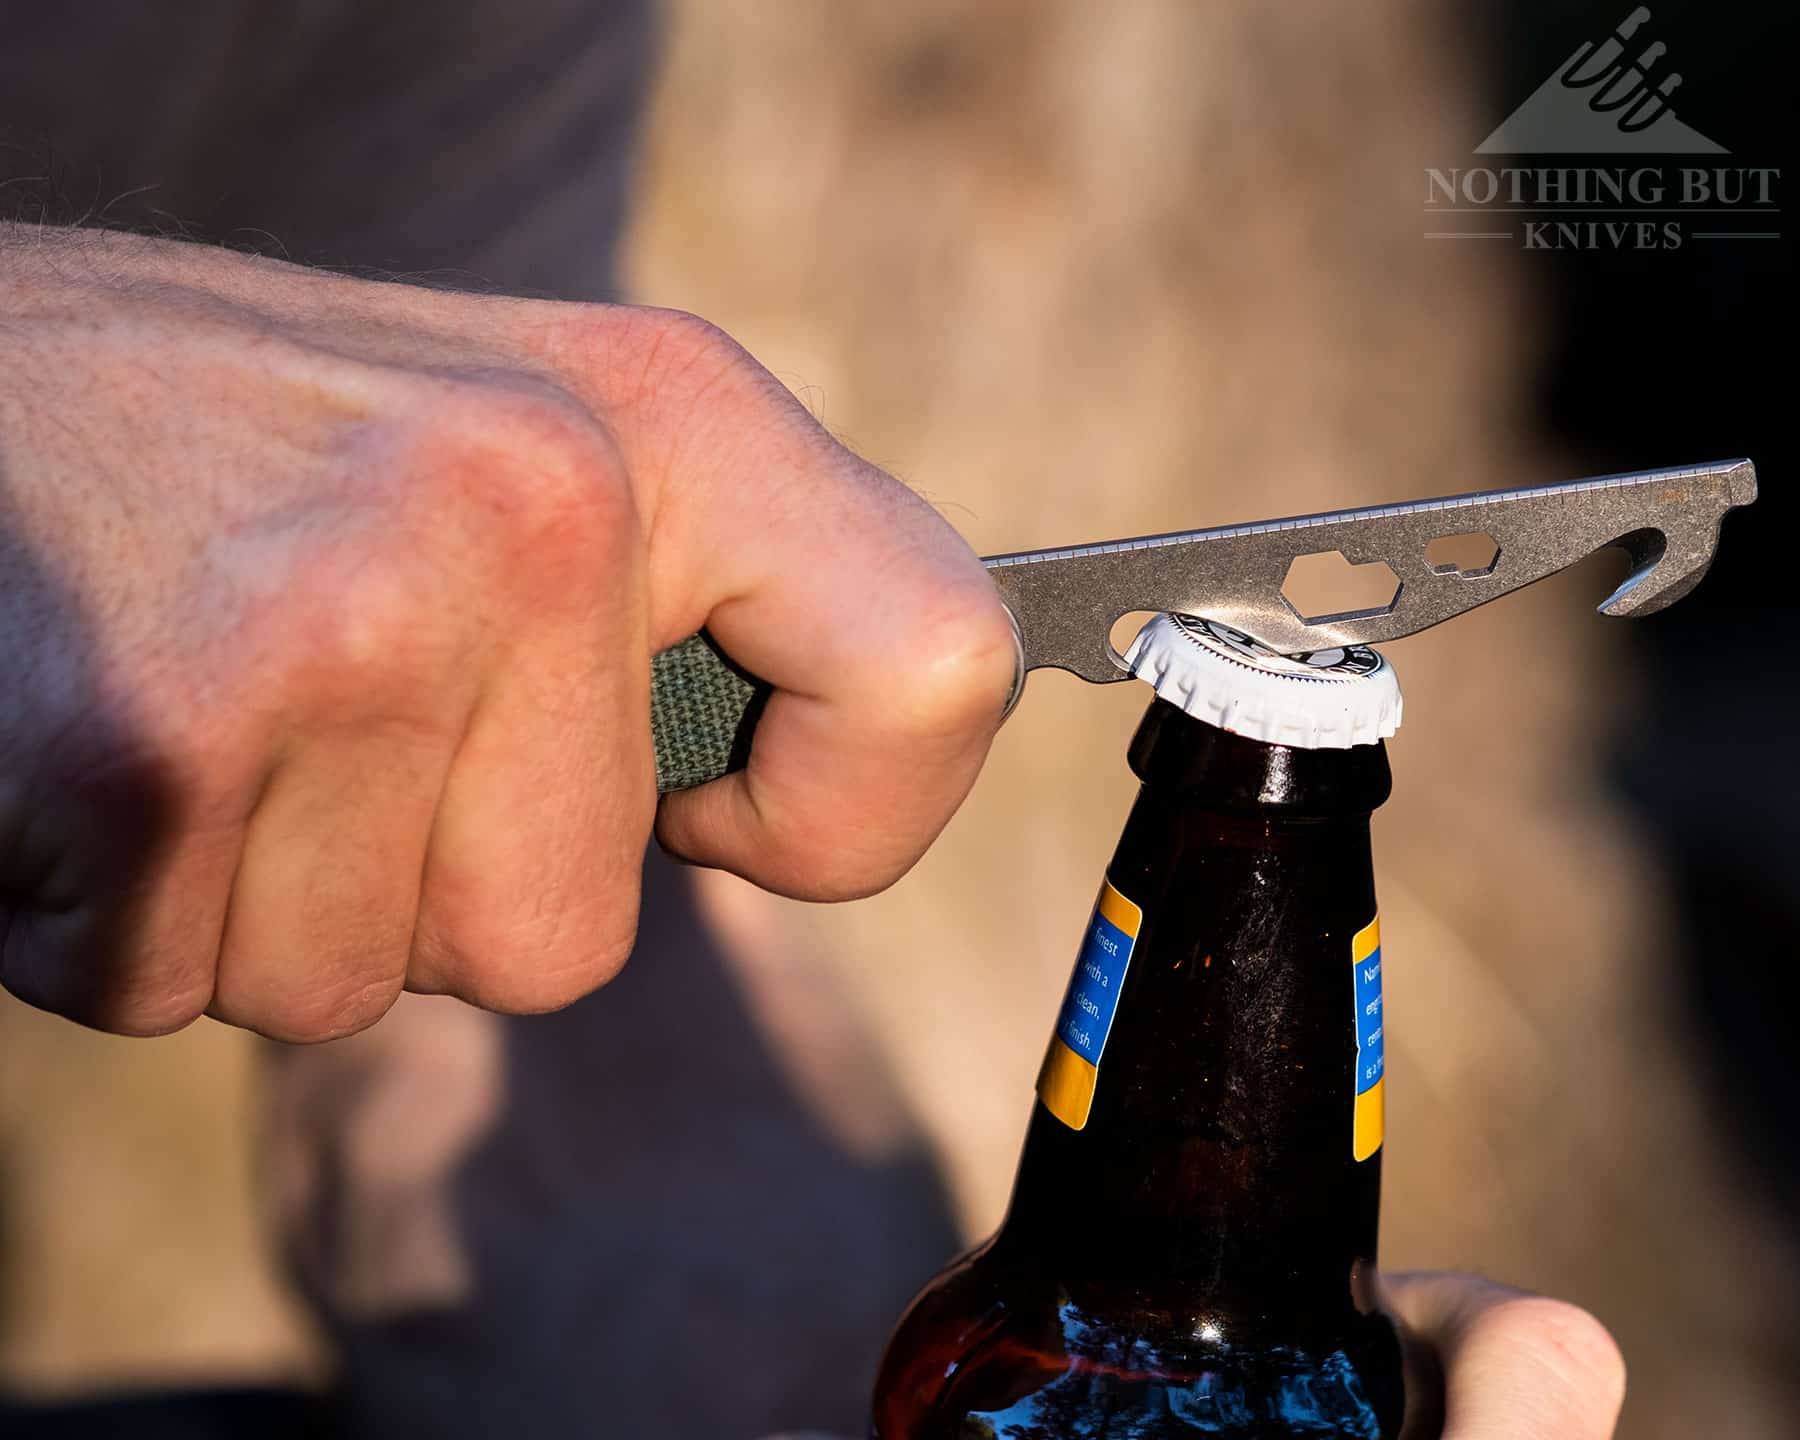 How to Open a Bottle Without a Bottle Opener, Using Everyday Items Instead